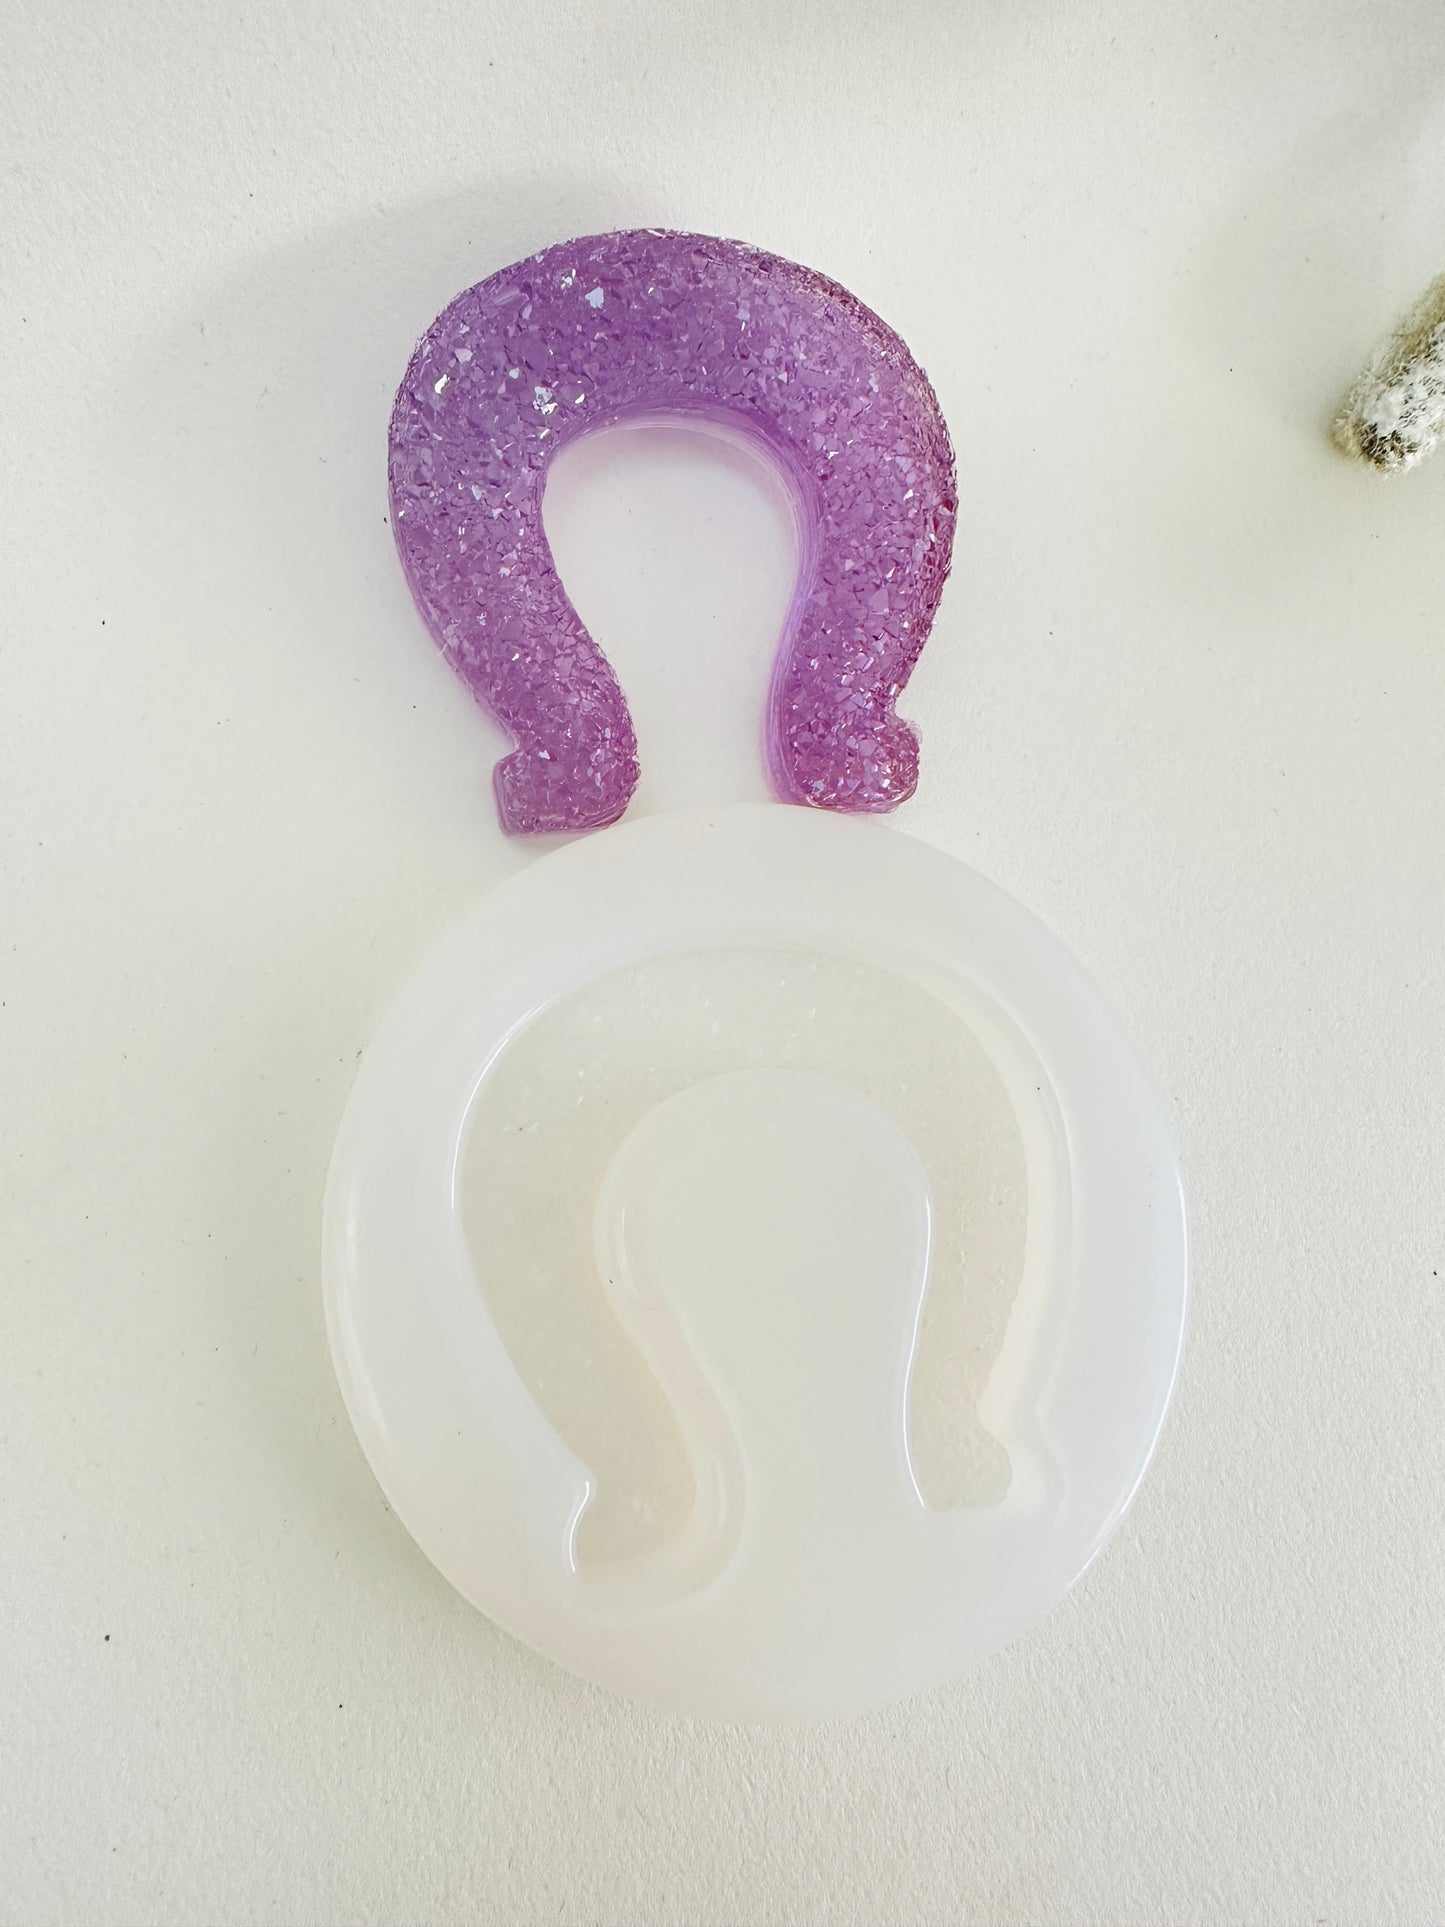 Horseshoe with Crystals Resin Silicone Mold - Sparkling DIY Craft Tool - Perfect for Jewelry Making - Unique Gift for Craft Lovers